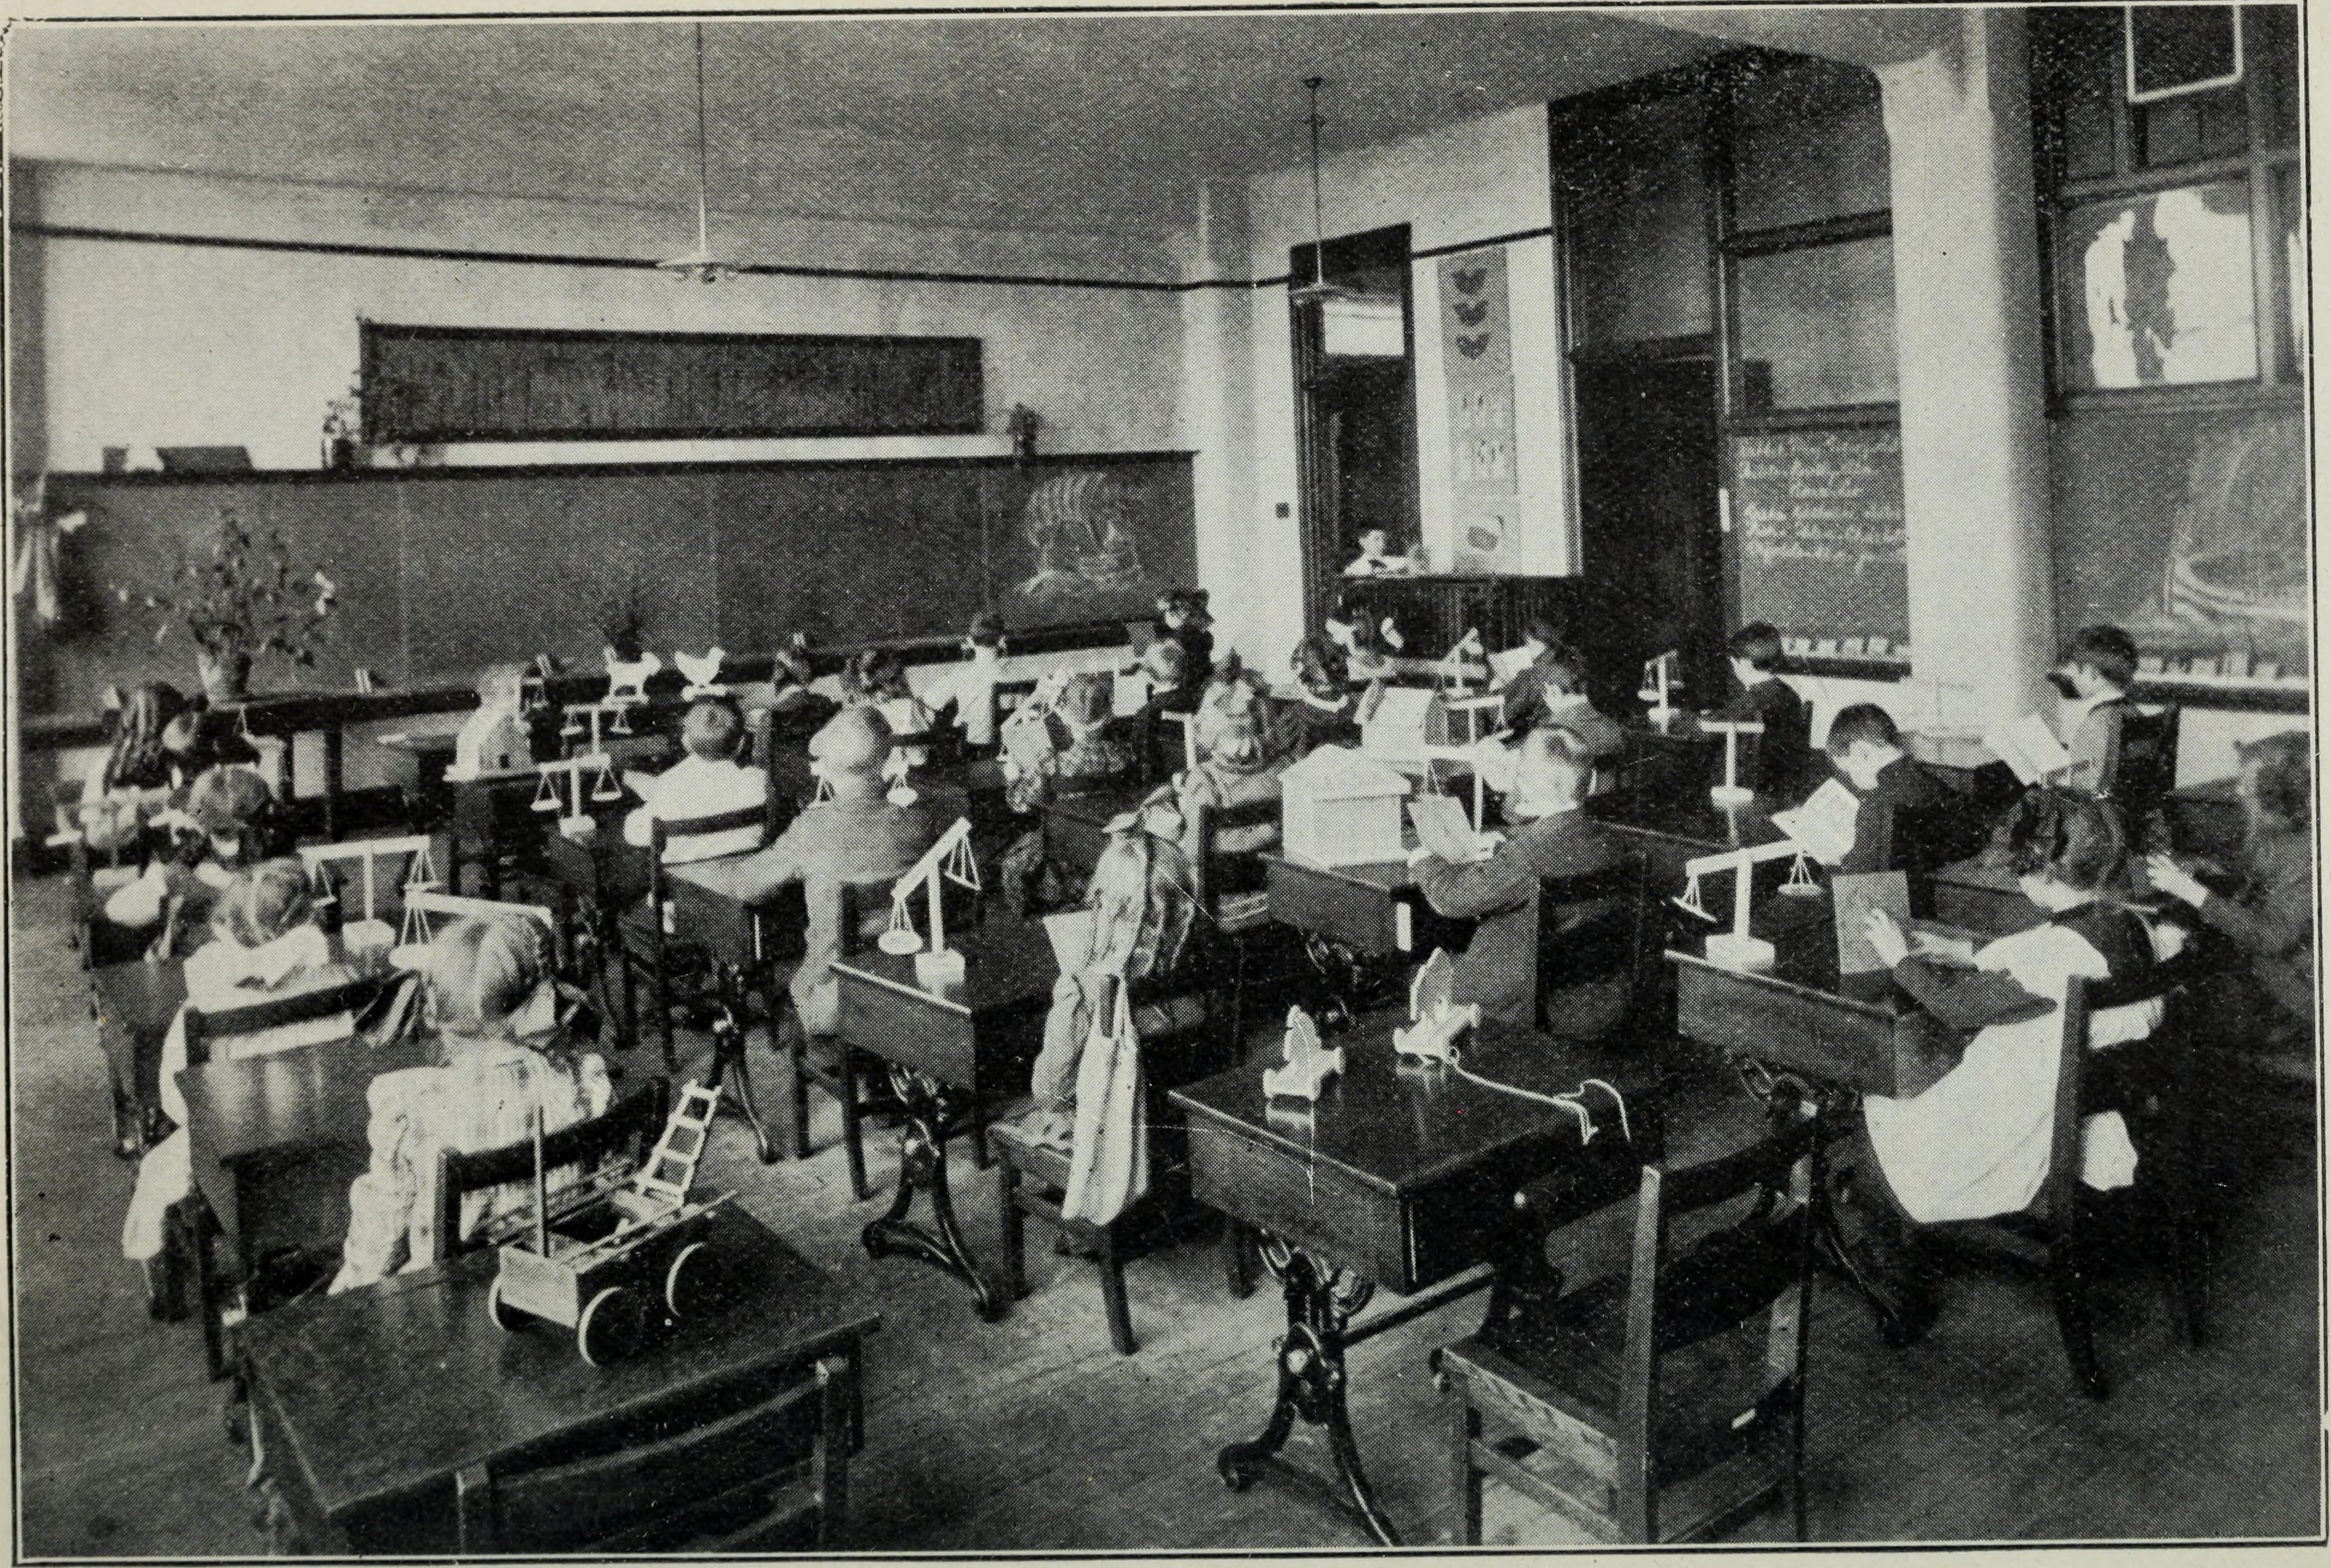 Https commons wikimedia org wiki. School 1912. Britain, Lincoln School, 1912 October. Indonesia Education in 1912. Old Desks from Schools.